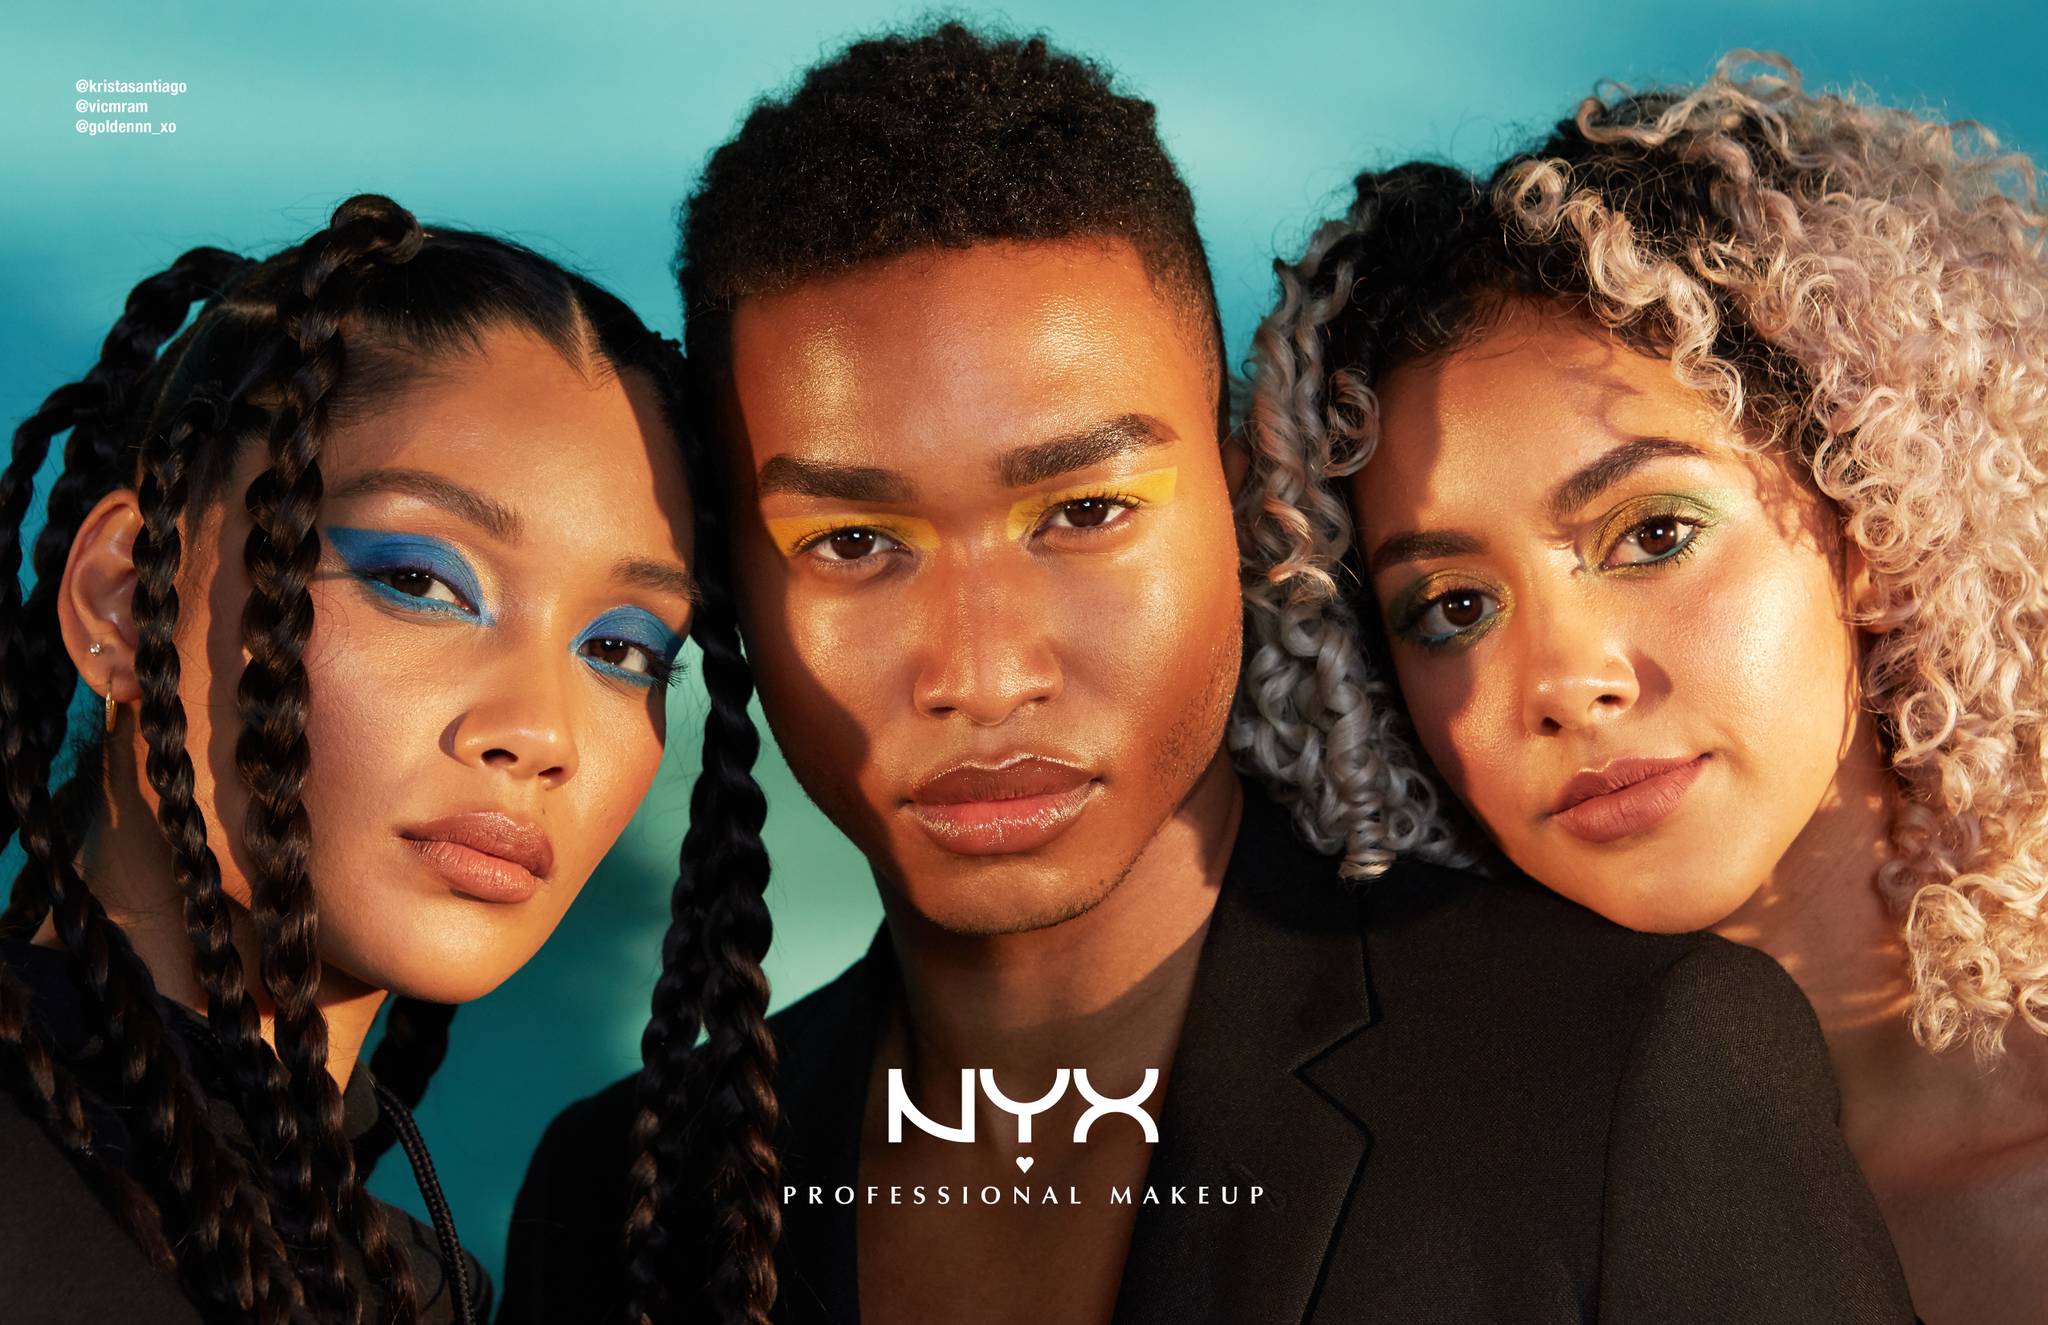 NYX: authentic LGBTQIA+ allyship in the world of beauty